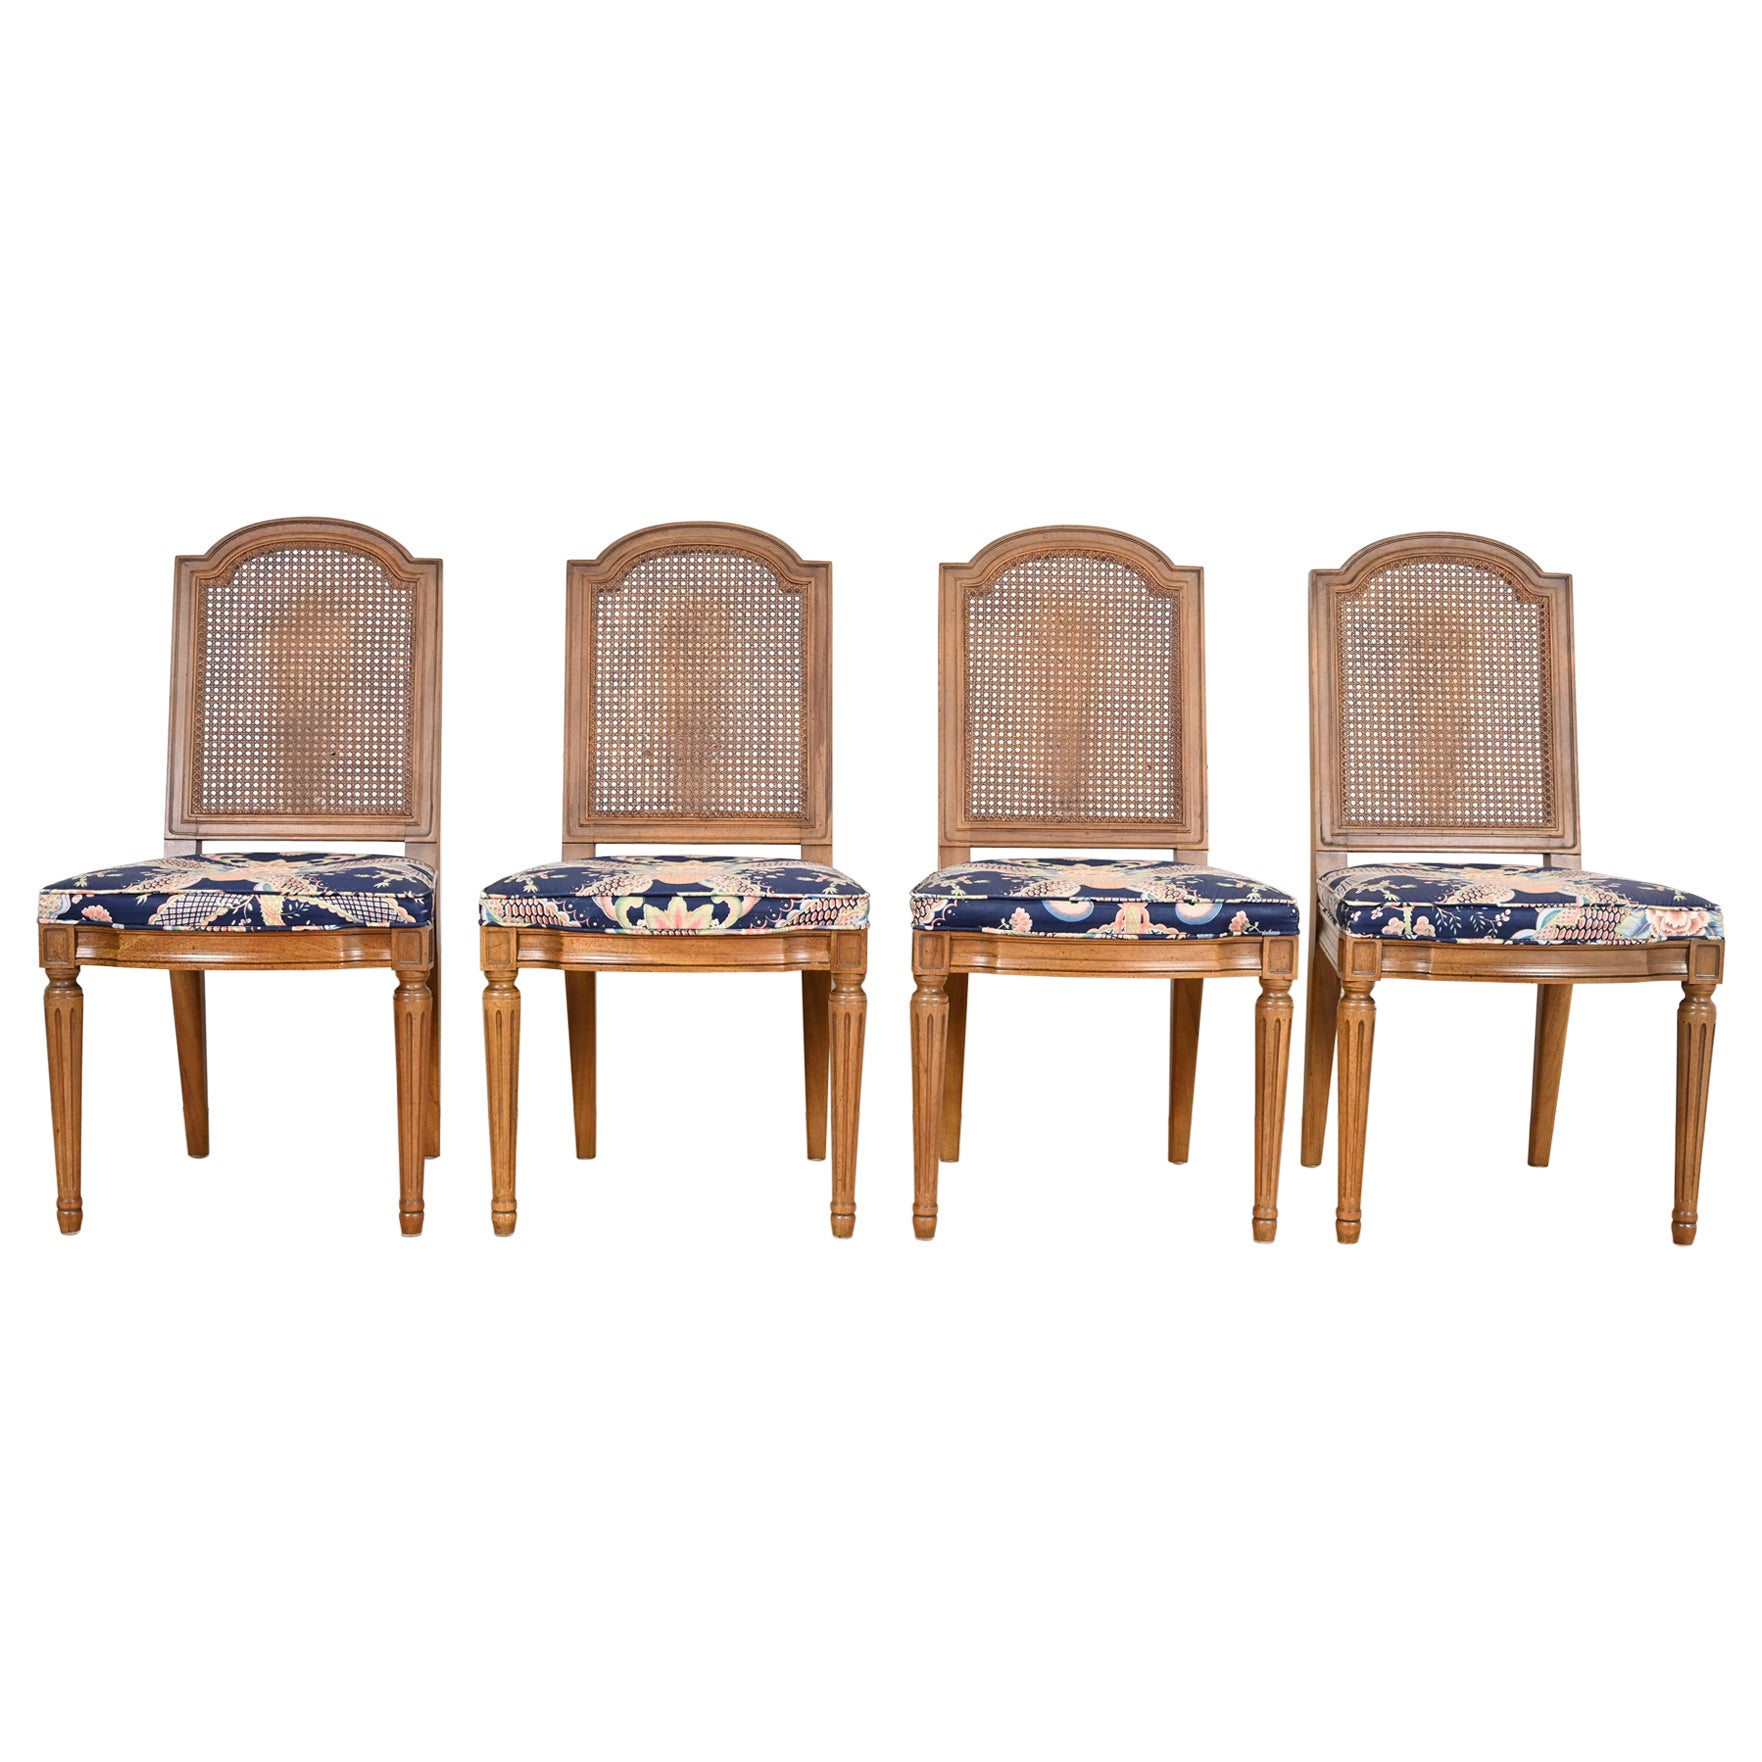 What are dining room chairs with arms called?